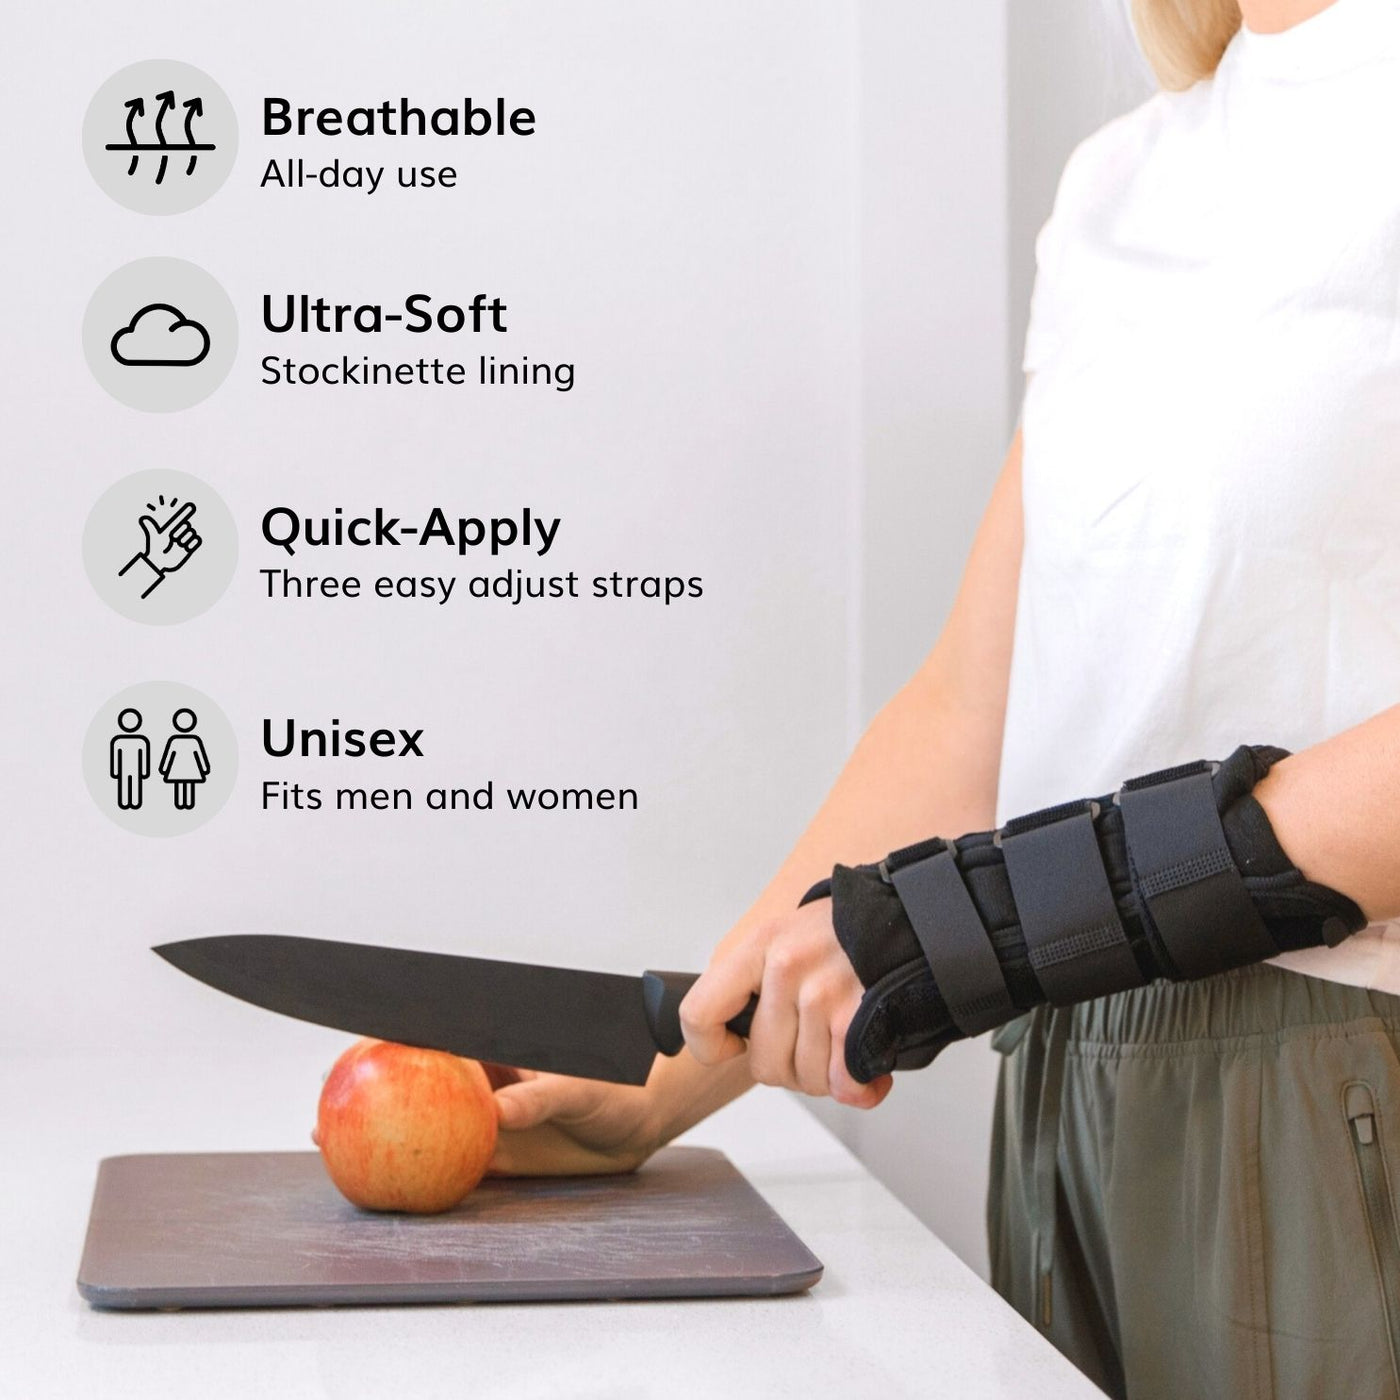 The breathable wrist fracture pain brace is quick to apply